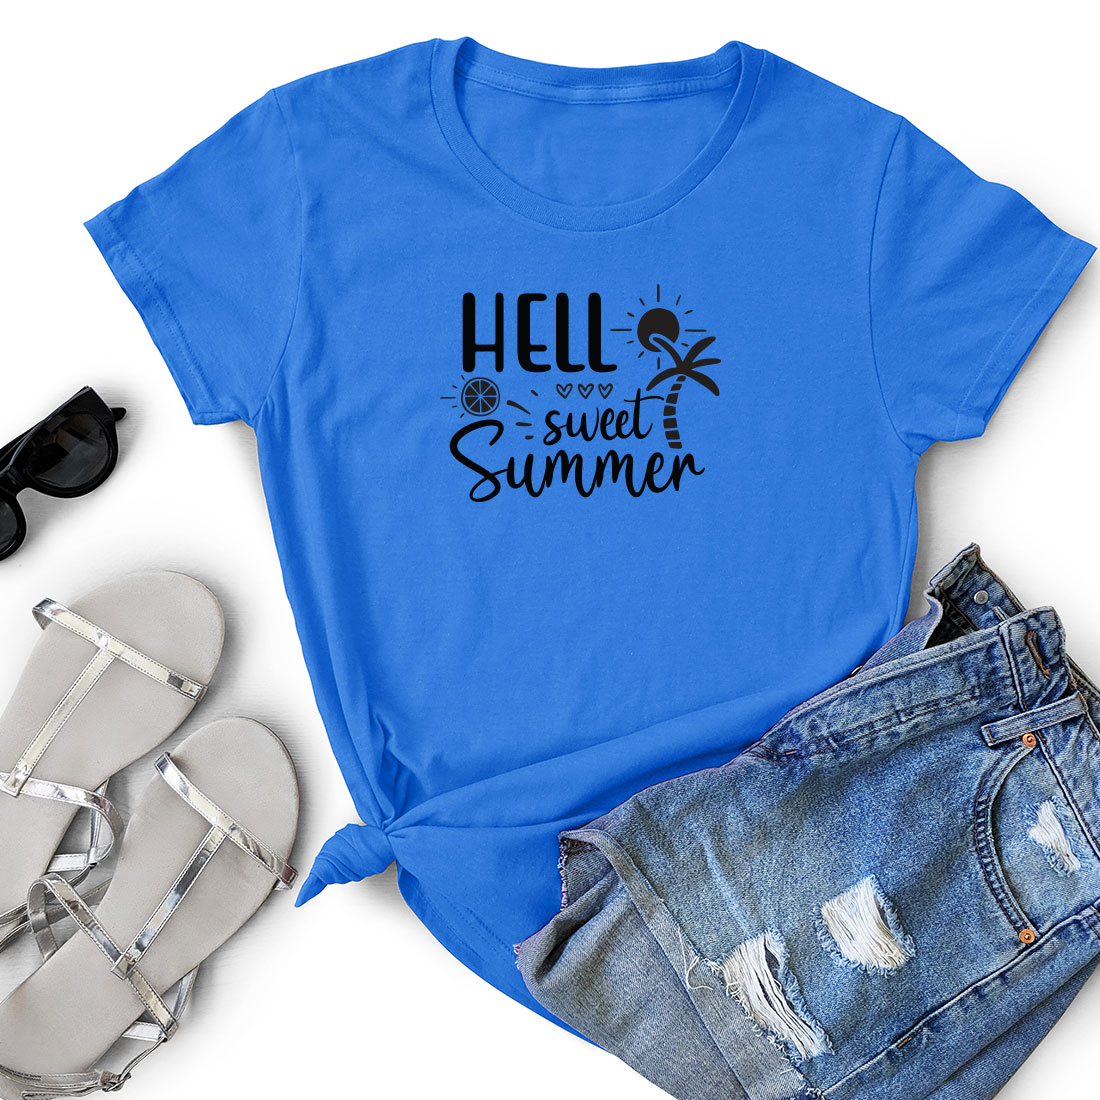 T - shirt that says hell is sweet and a pair of shorts.